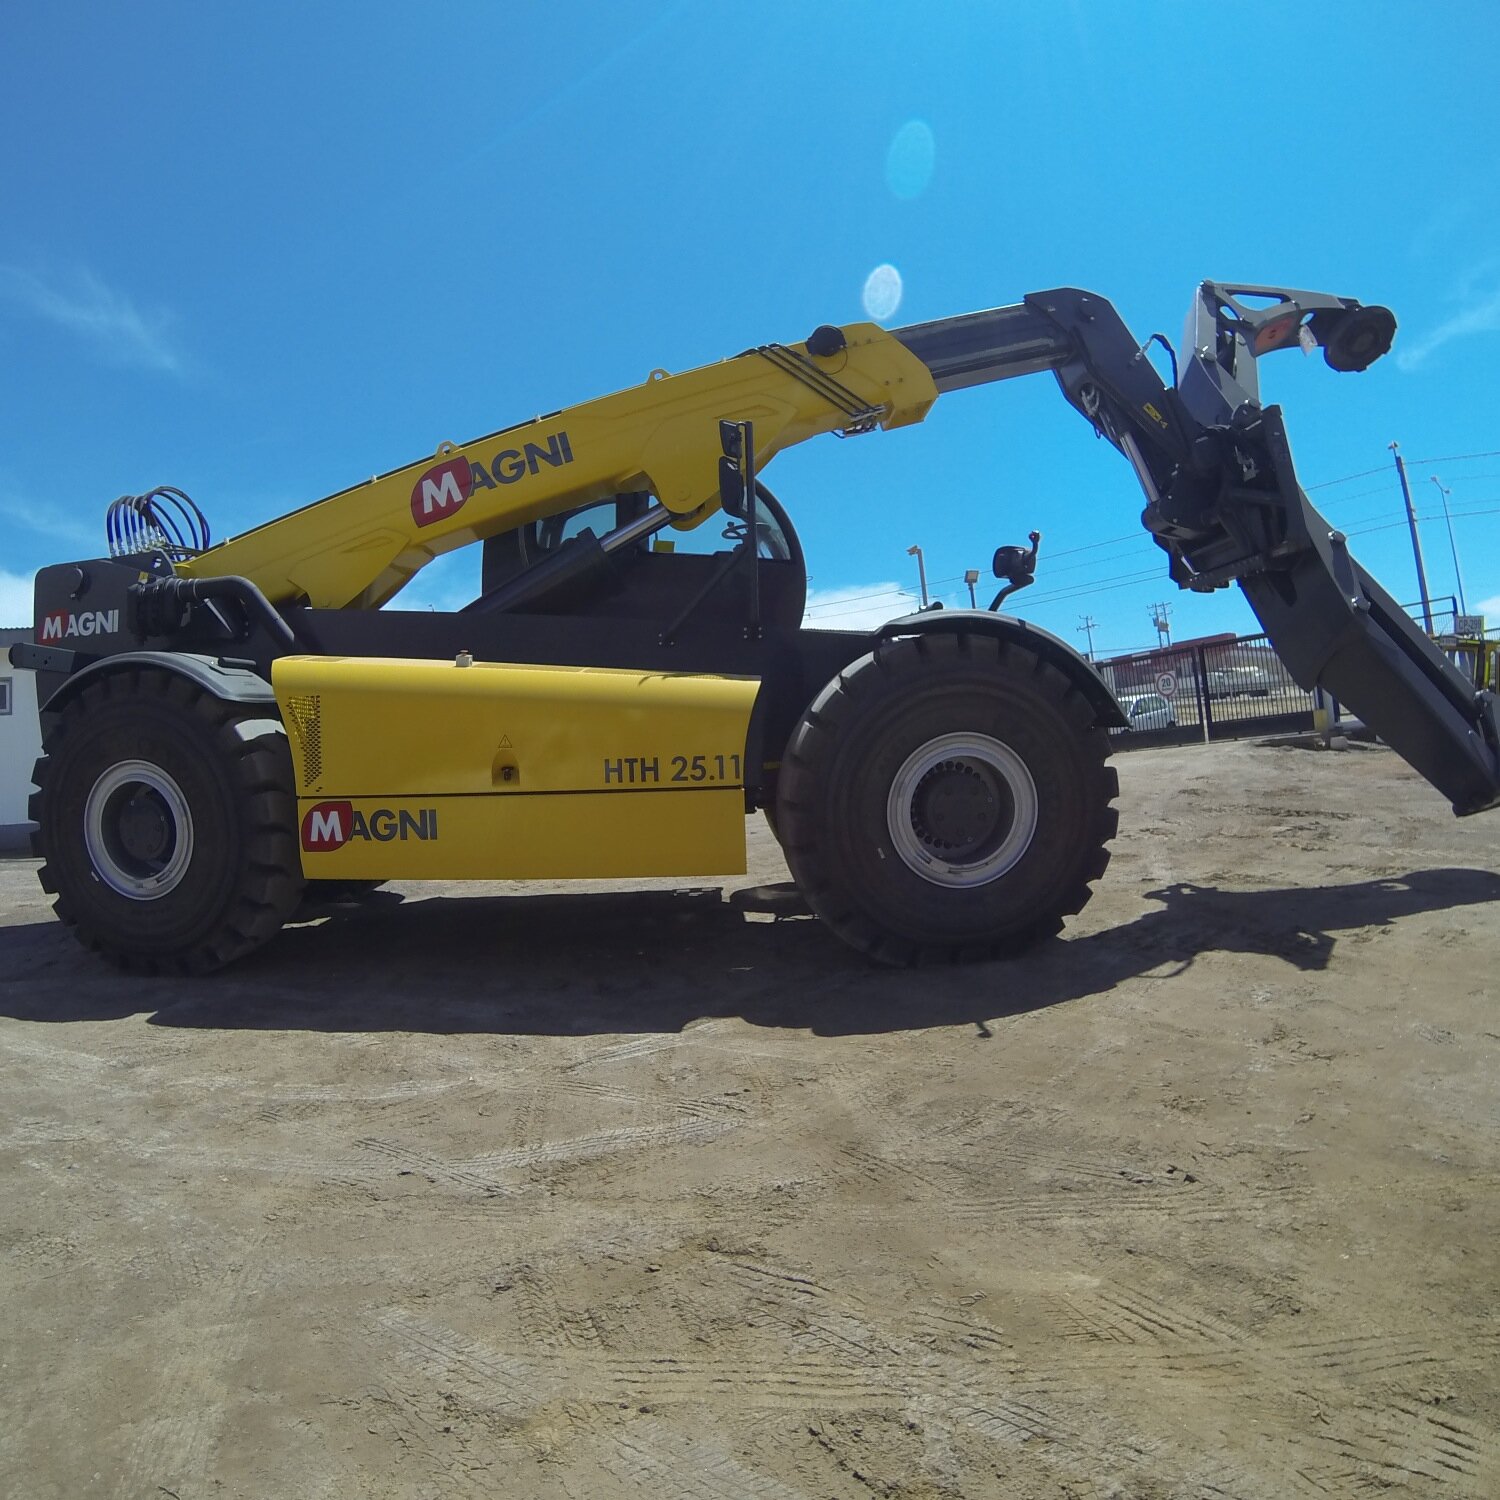 Mining Applications, Telescopics Handlers, Tire Handlers, Final Drive Handlers, Front Suspensions Off Highway Trucks... you need we create a solution